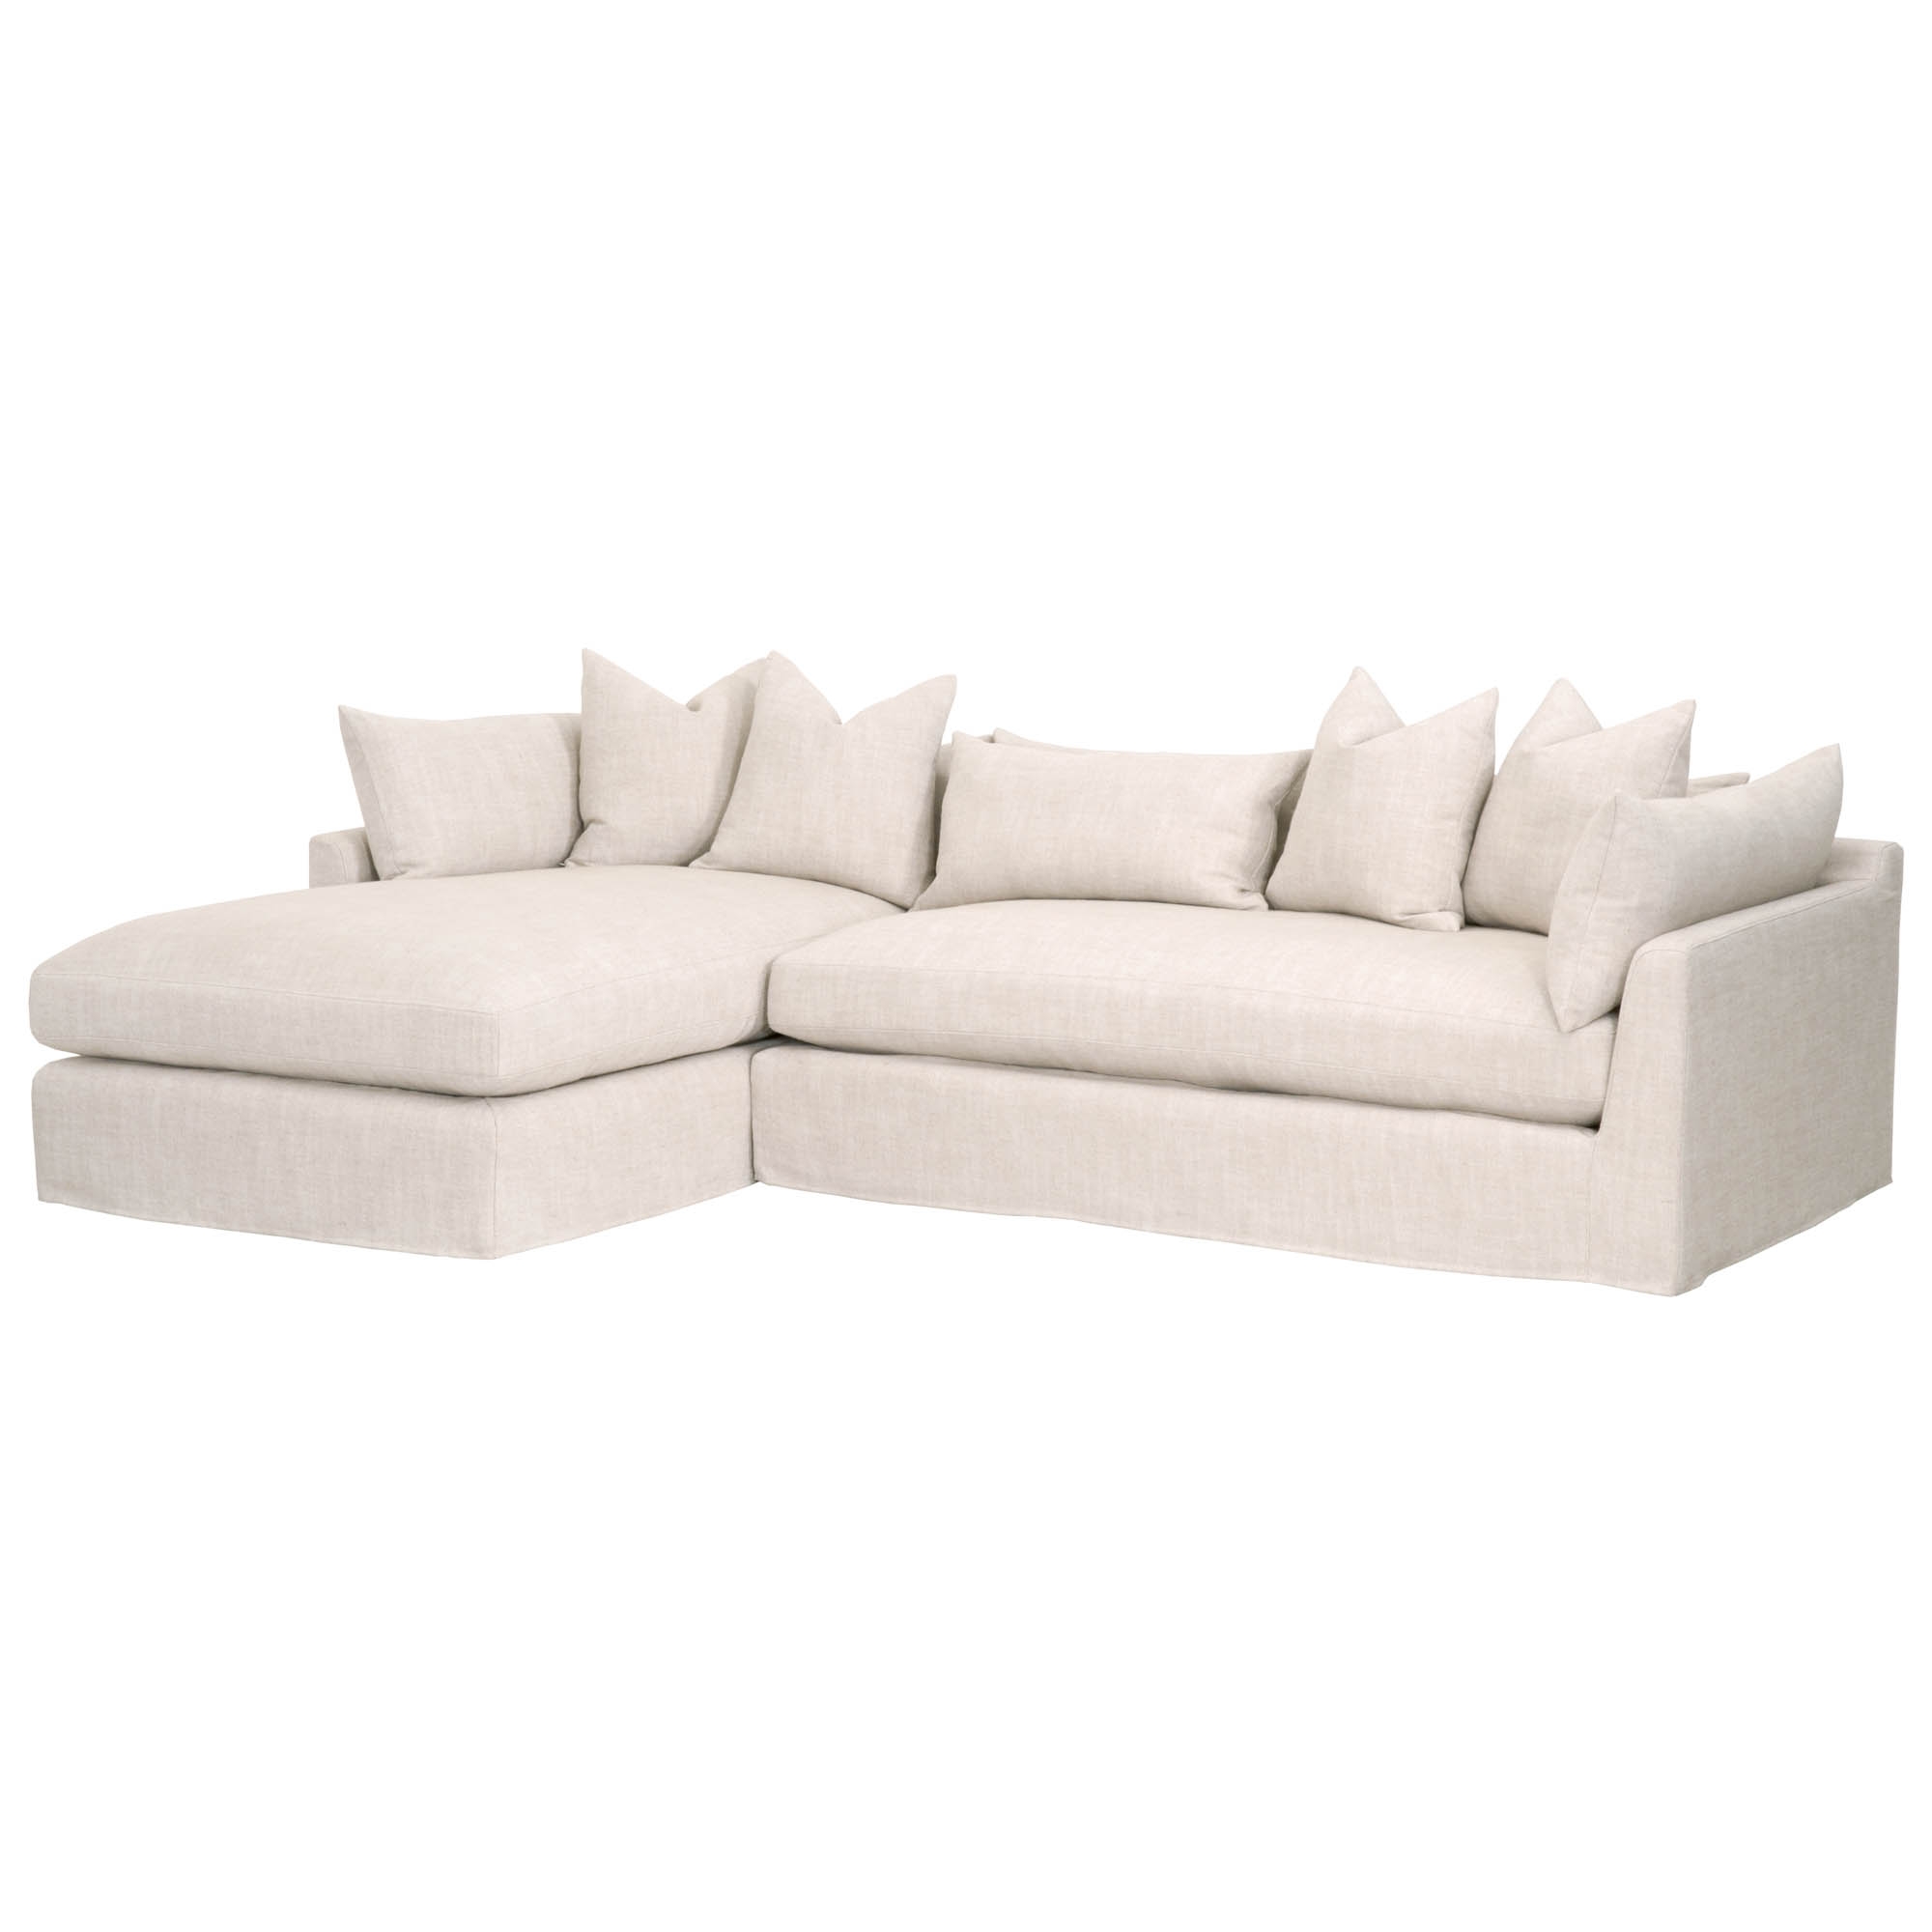 Haven 110" Left Facing Lounge Slipcover Sectional, Bisque, Espresso - Image 1